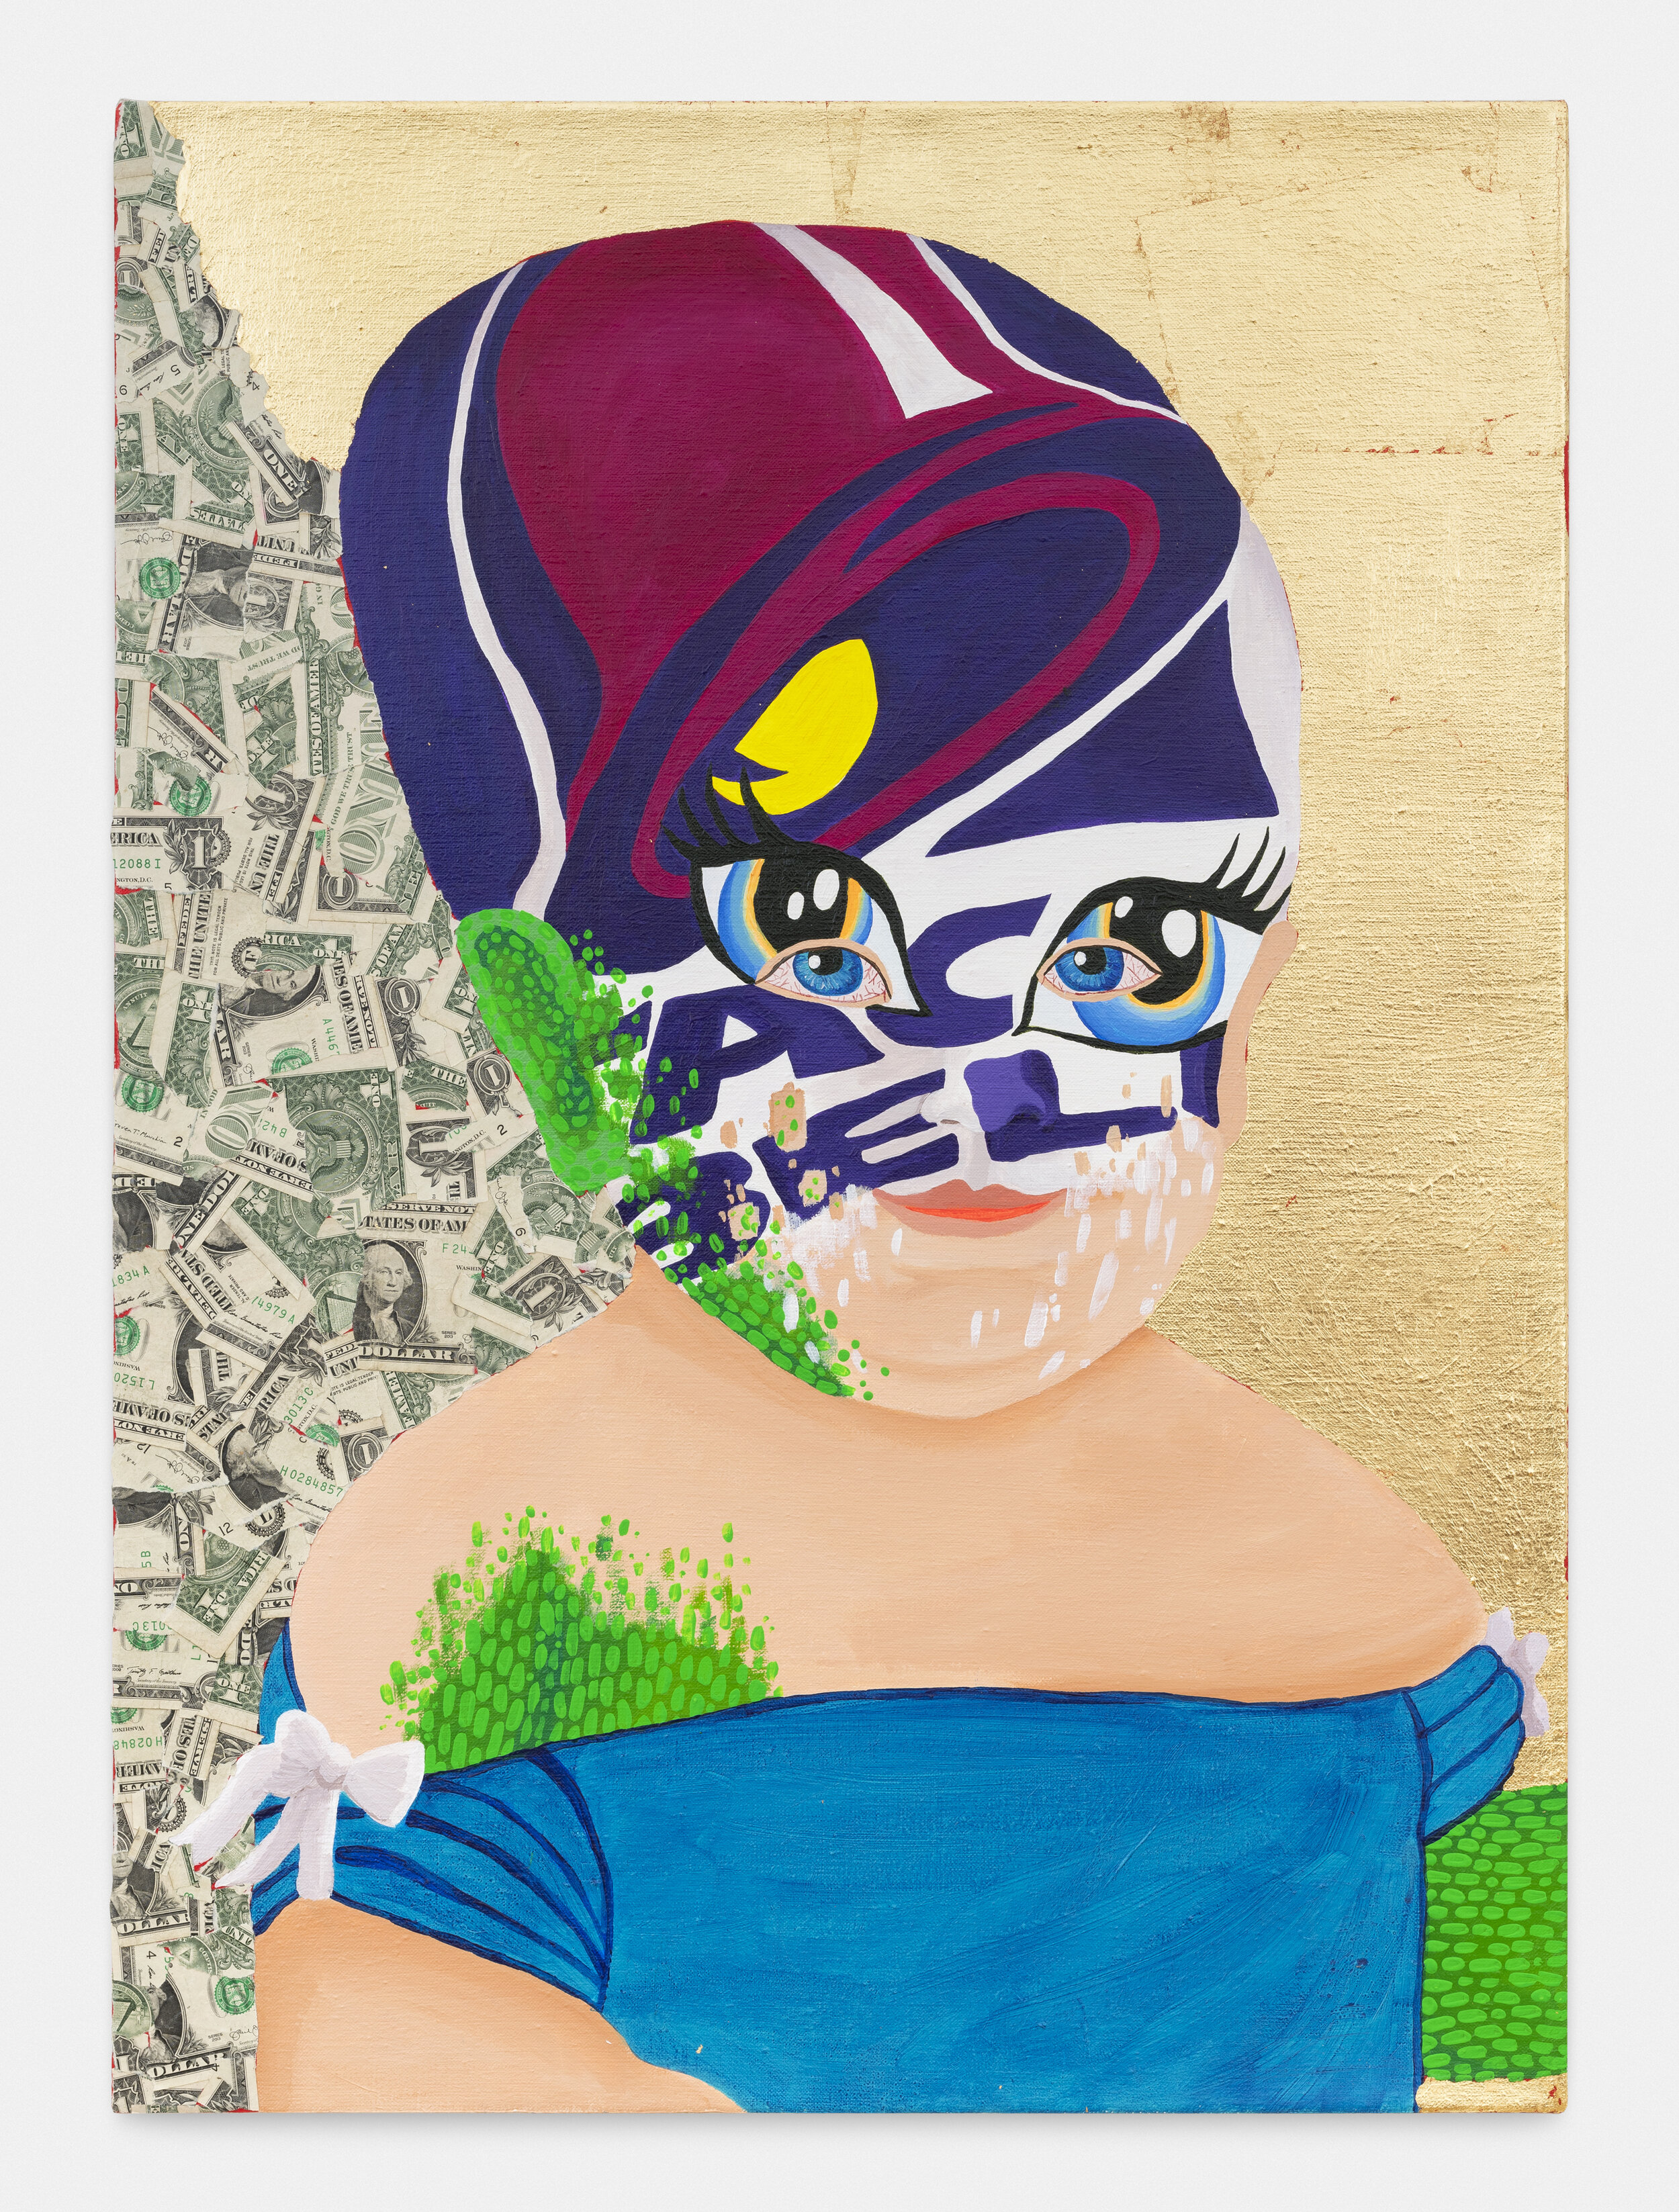   Baby with Taco Bell Face Paint (Ring My Bell),  2019  29 x 21 x 1.5 Inches (73.66 x 53.34 x 3.81 cm.)  Acrylic, gold leaf, and American dollar bills on linen 